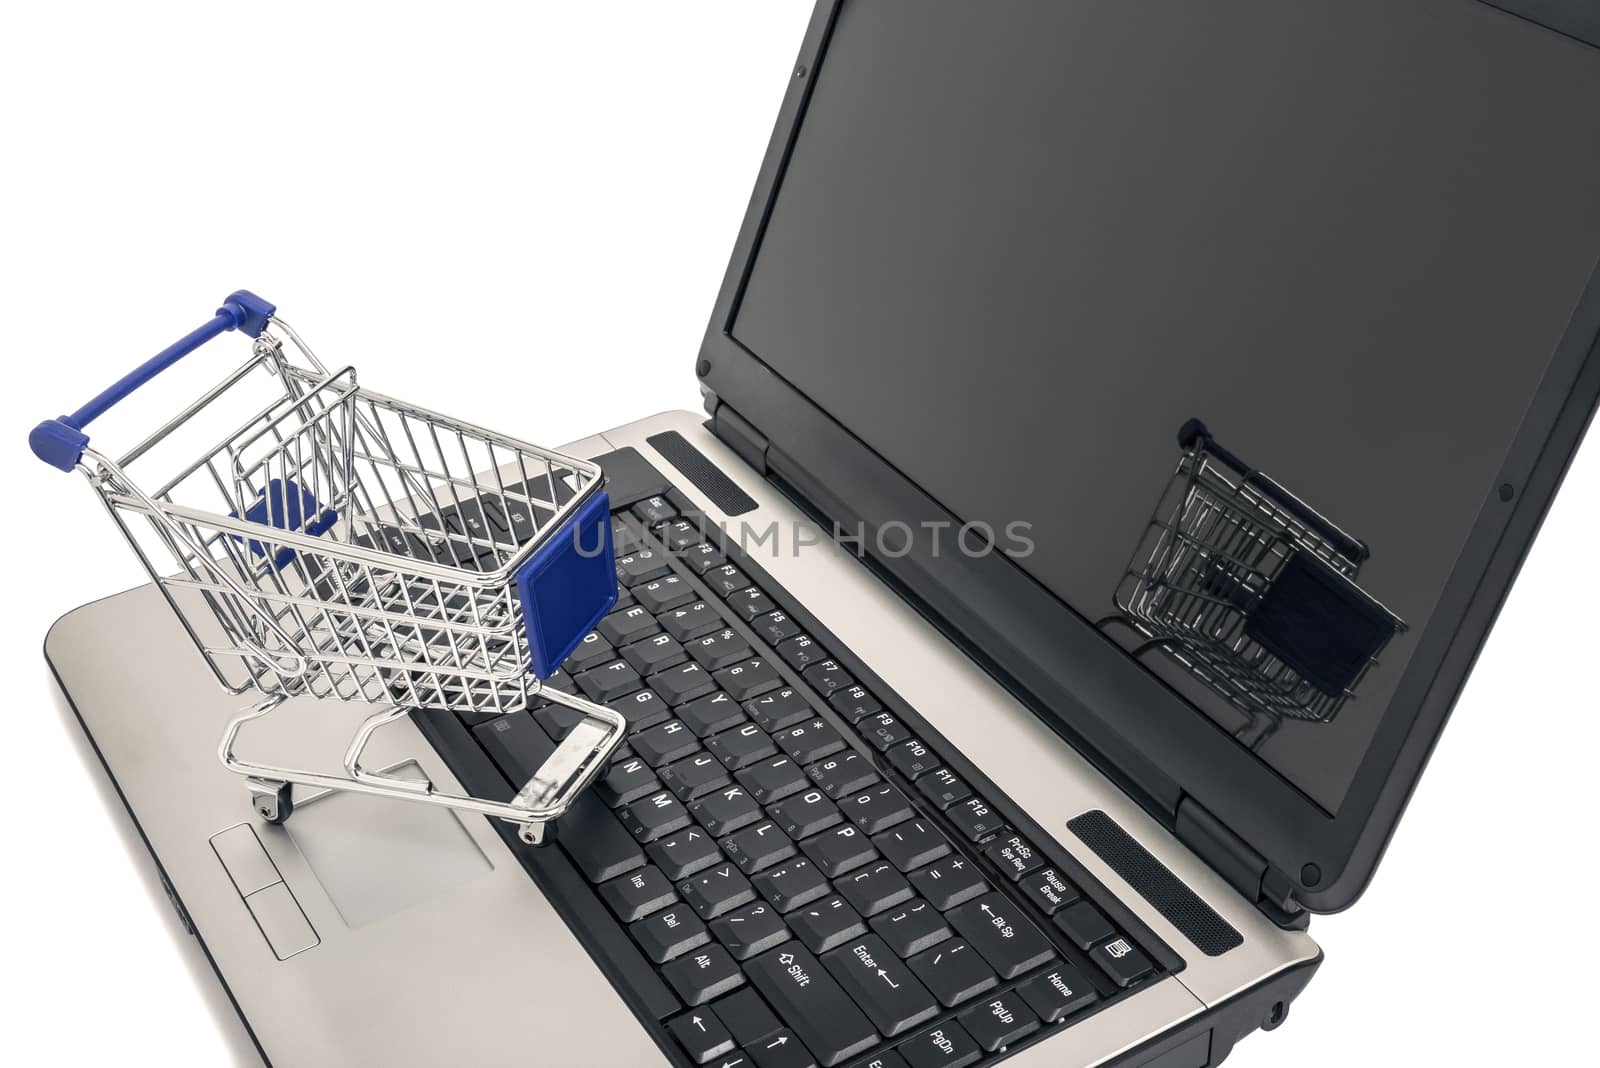 E-Commerce Concept Shopping Cart On Laptop by stockbuster1